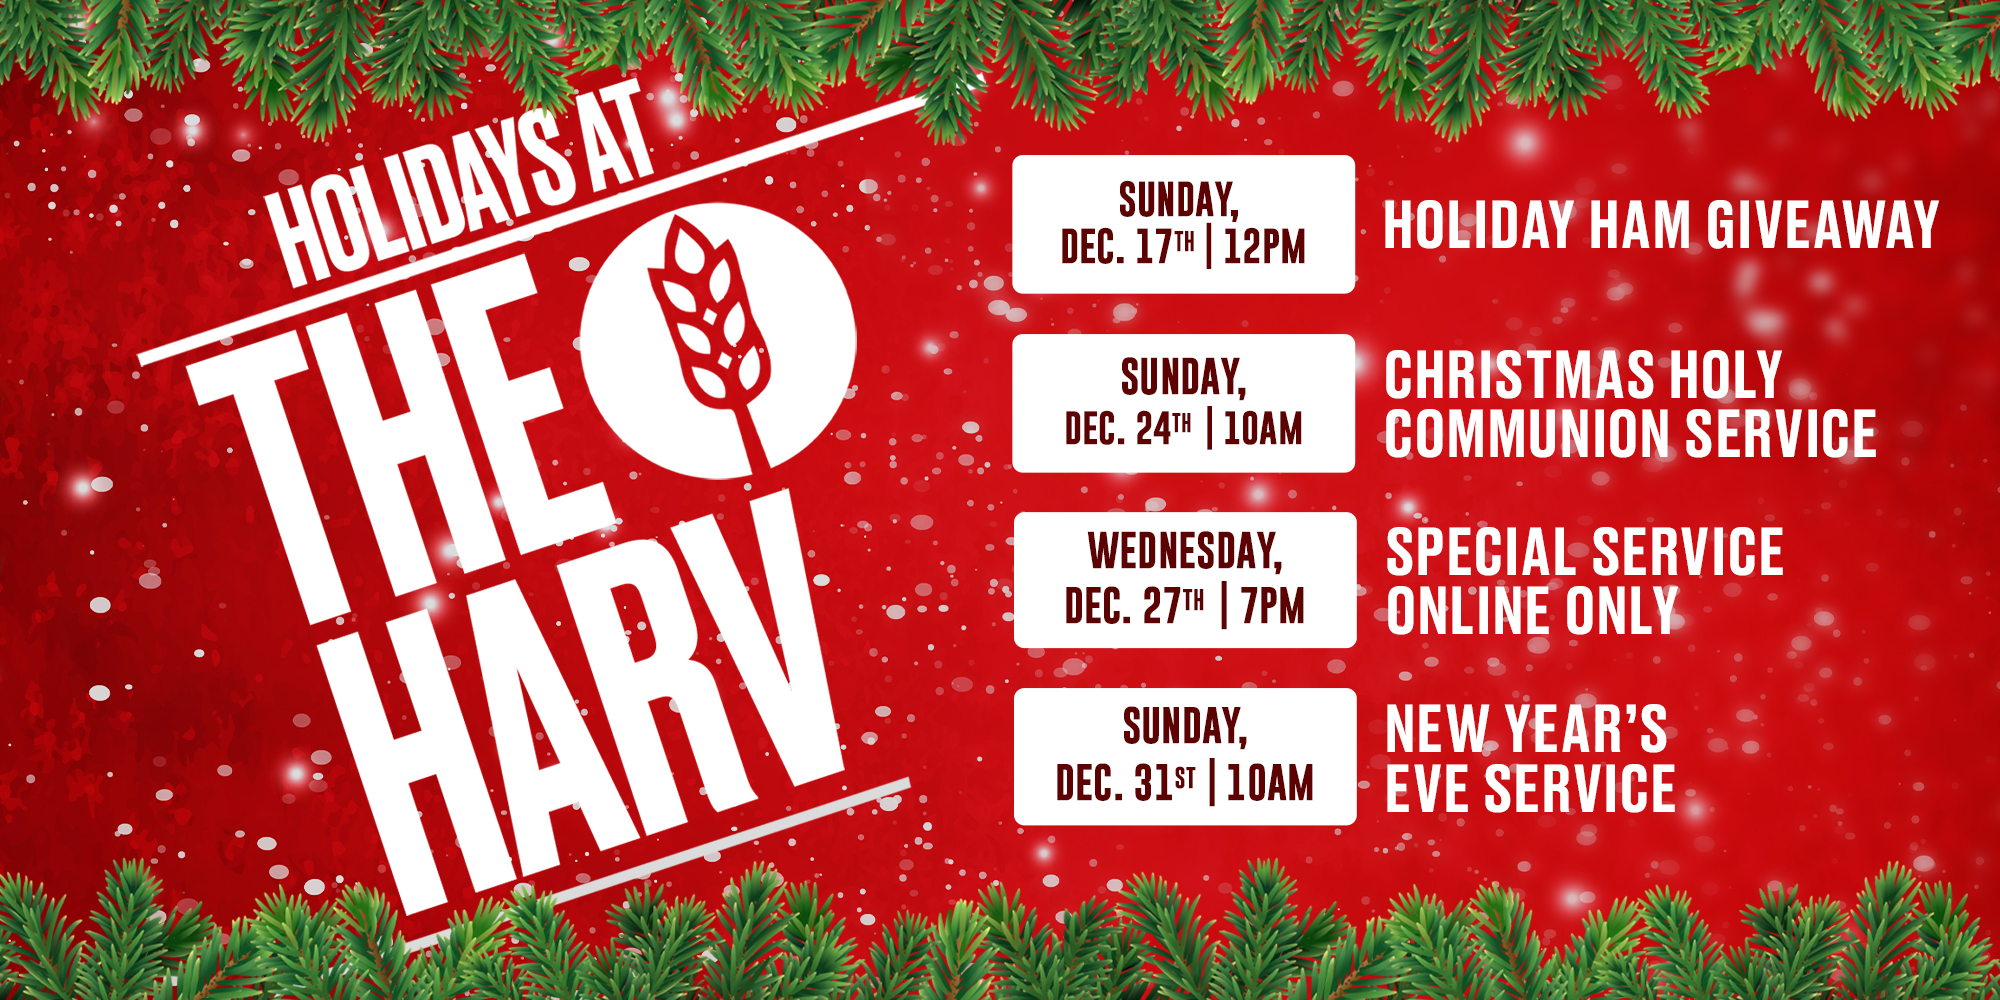 Holidays At The Harv - December 24th - Christmas Holy Communion Service - December 31st - New Year's Eve Service